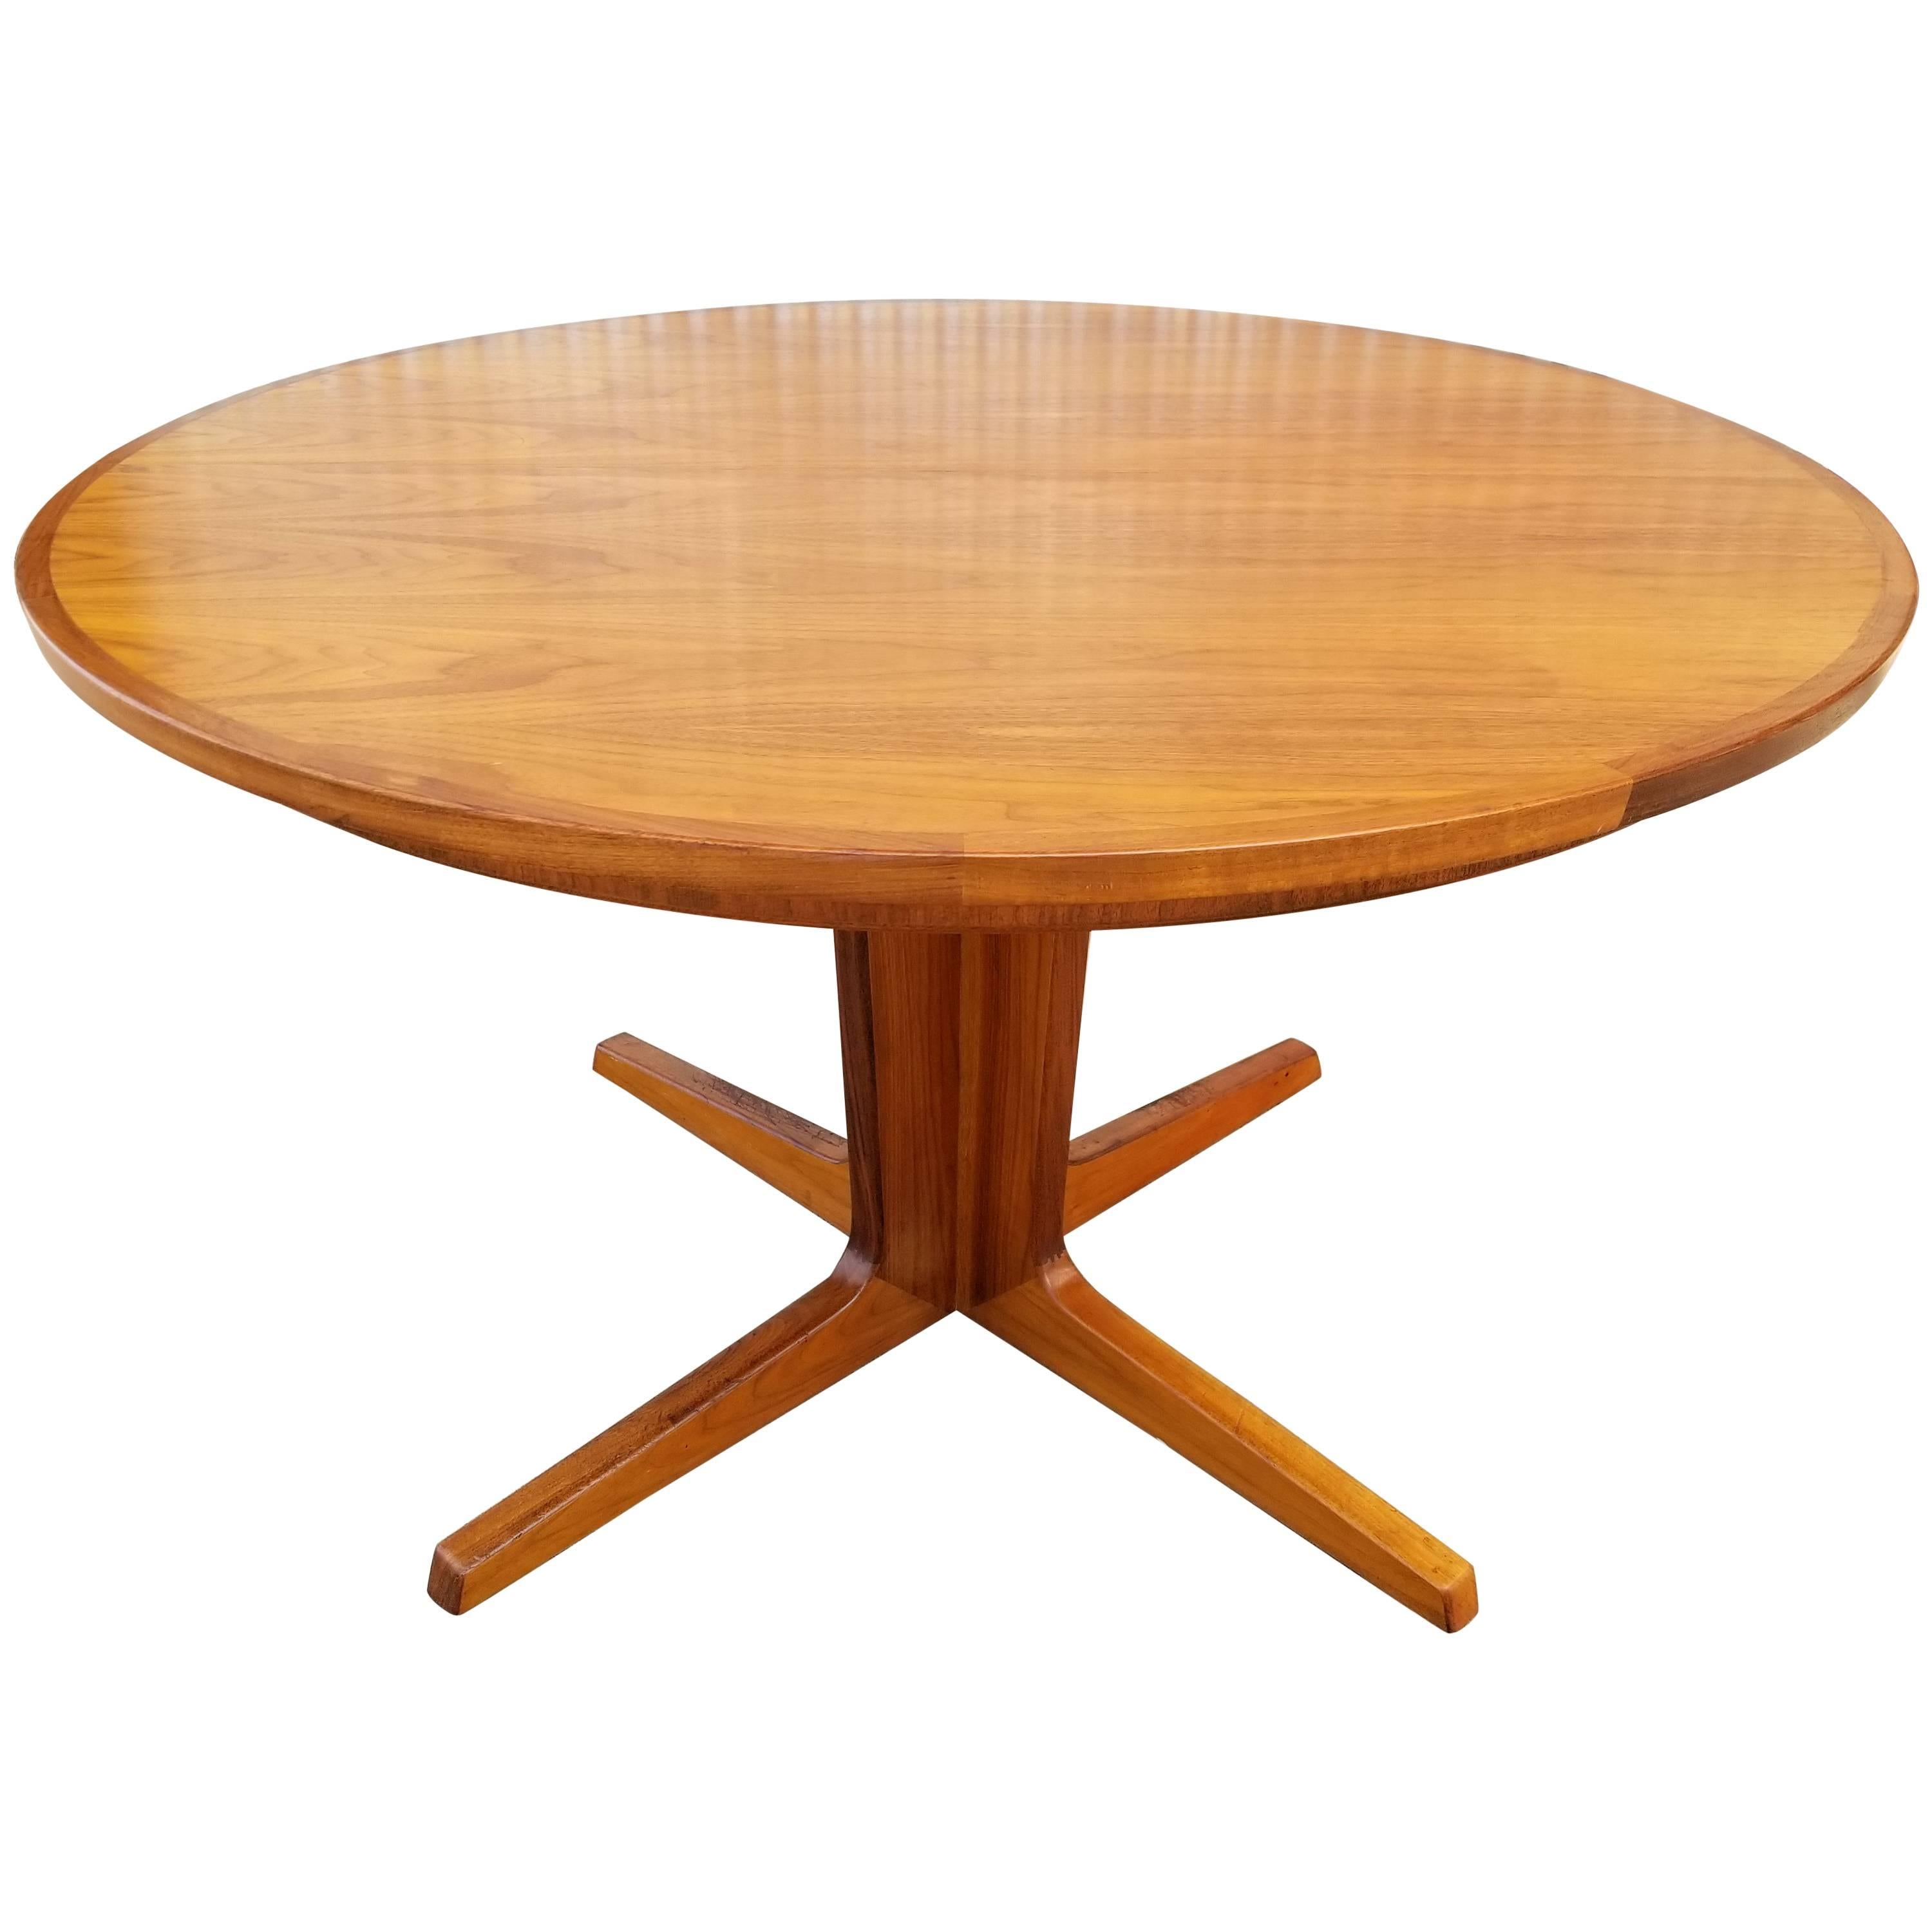 Round Teak Dining Table with Two Leaves